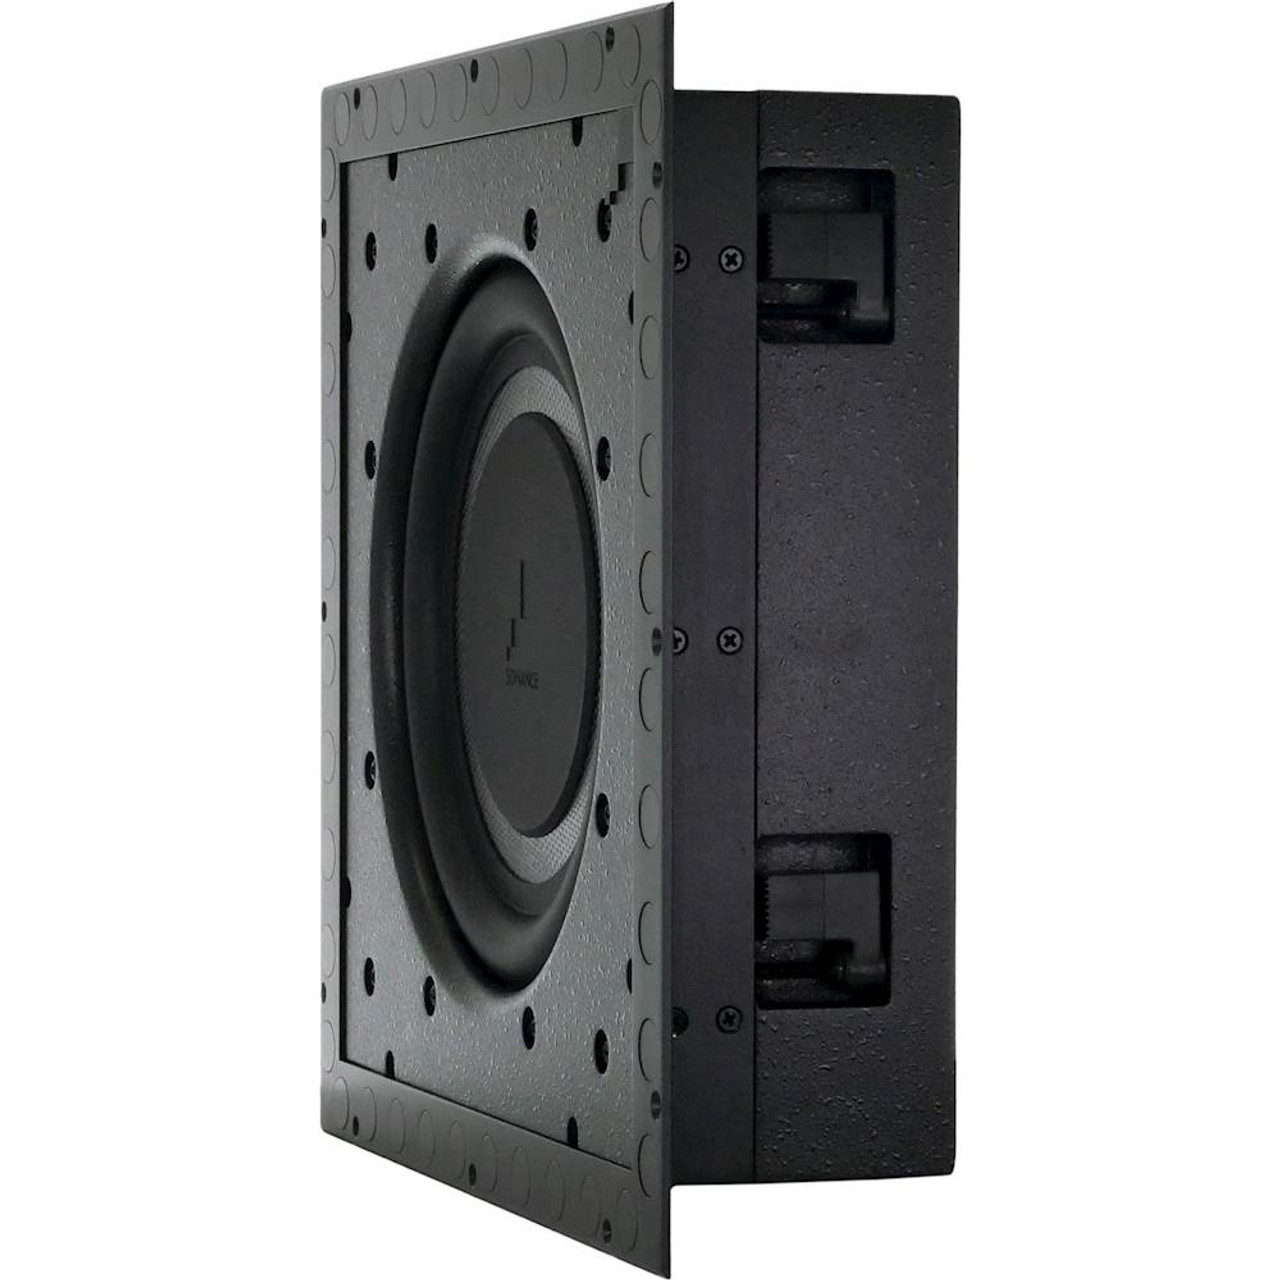 Sonance - Visual Performance 10" Passive In-Wall Subwoofer - Paintable White